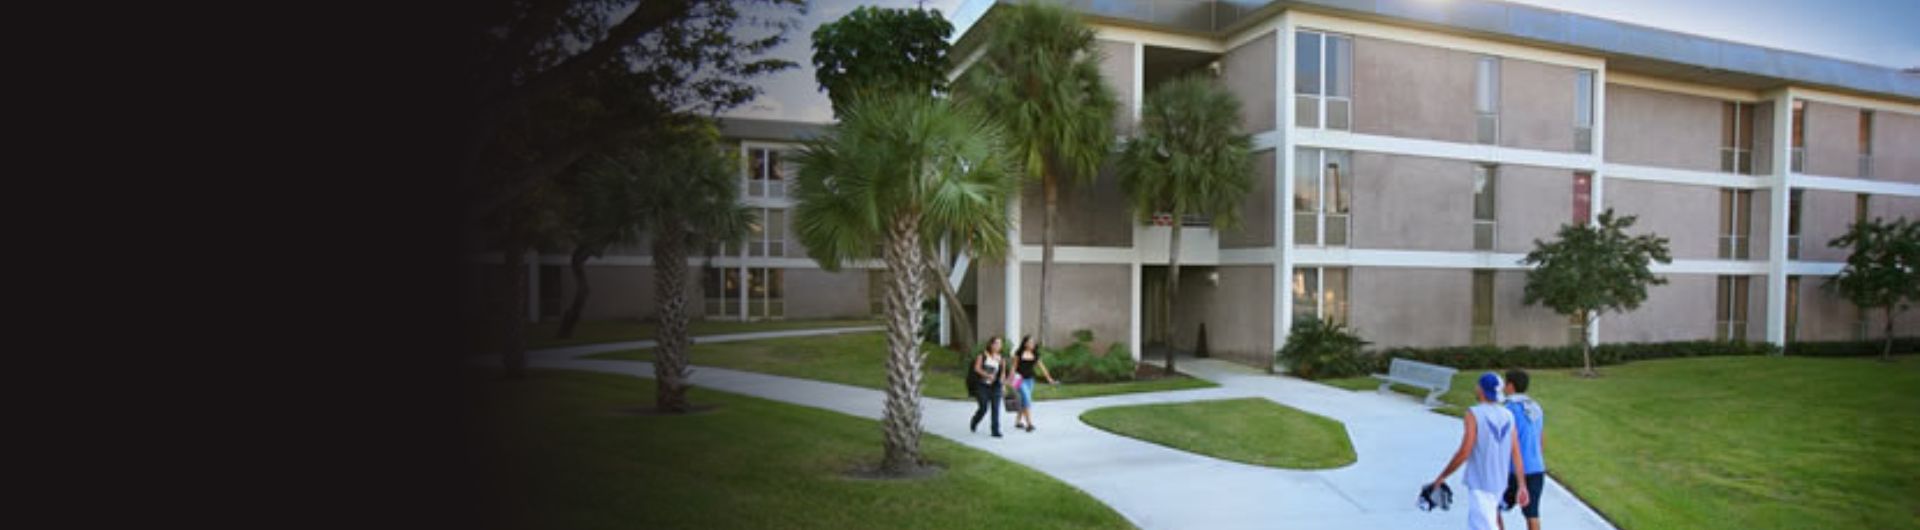 Students walk to and from the FFV residence halls on sidewalks cutting through well-groomed lawns with palms lining the building and paths.